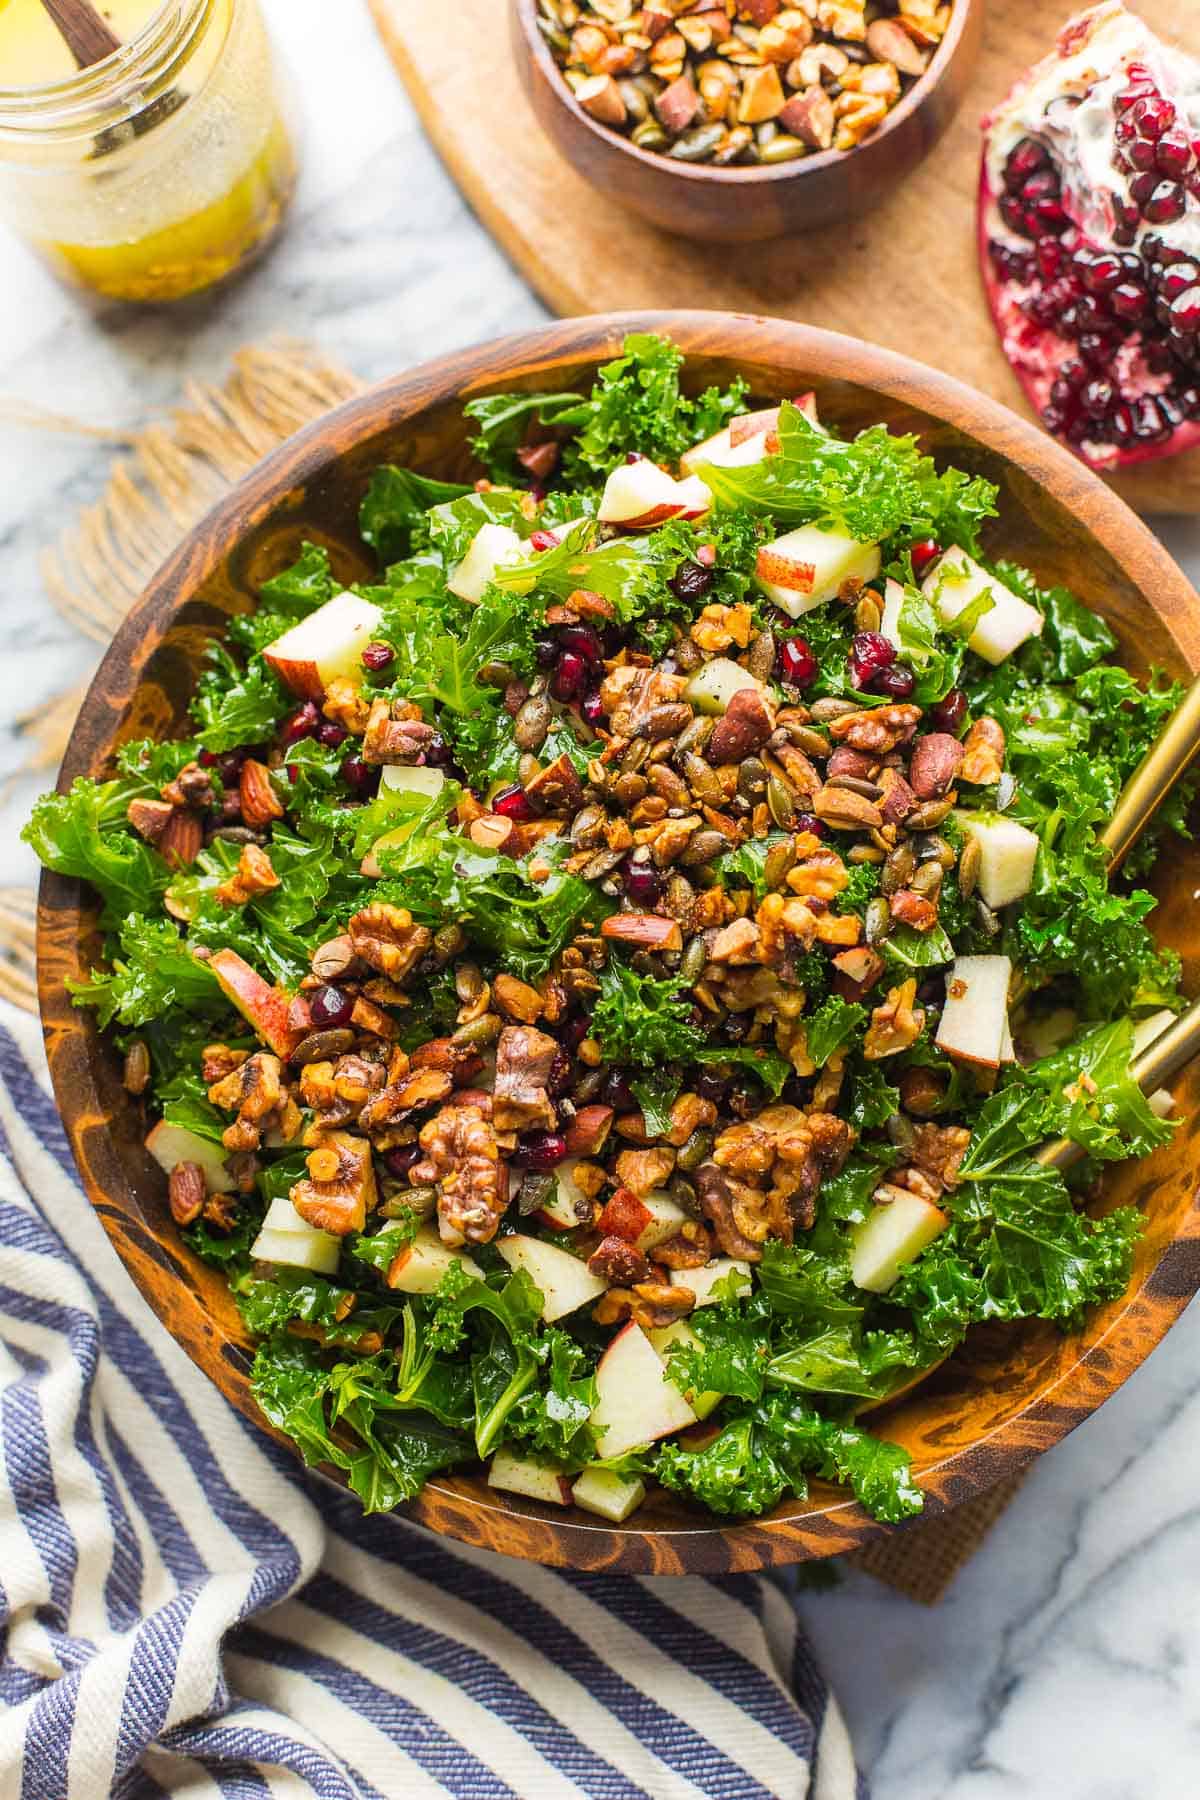 Hearty Winter Salad with Honey Roasted Roots, Kale & Pomegranate